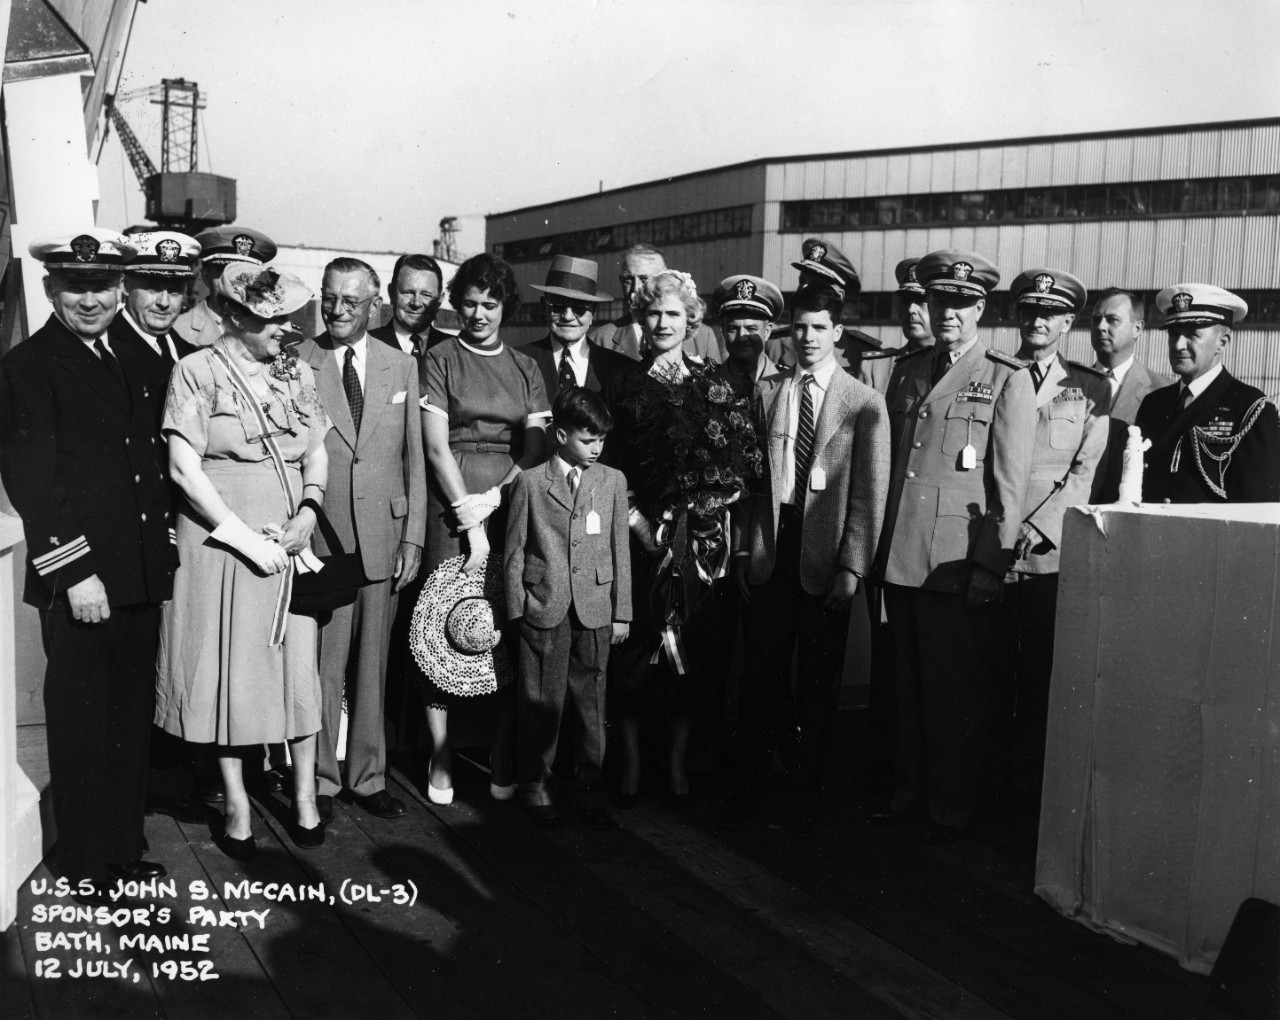 USS John McCain (DL-3) Sponsor's Party, at Bath, Maine. Ship's sponsor Roberta McCain is at center, with her husband Captain John McCain, Jr. behind her in shadow. Her son John McCain III is to their right. To the left, wearing a hat and sunglasses, is retired Fleet Admiral William Halsey.